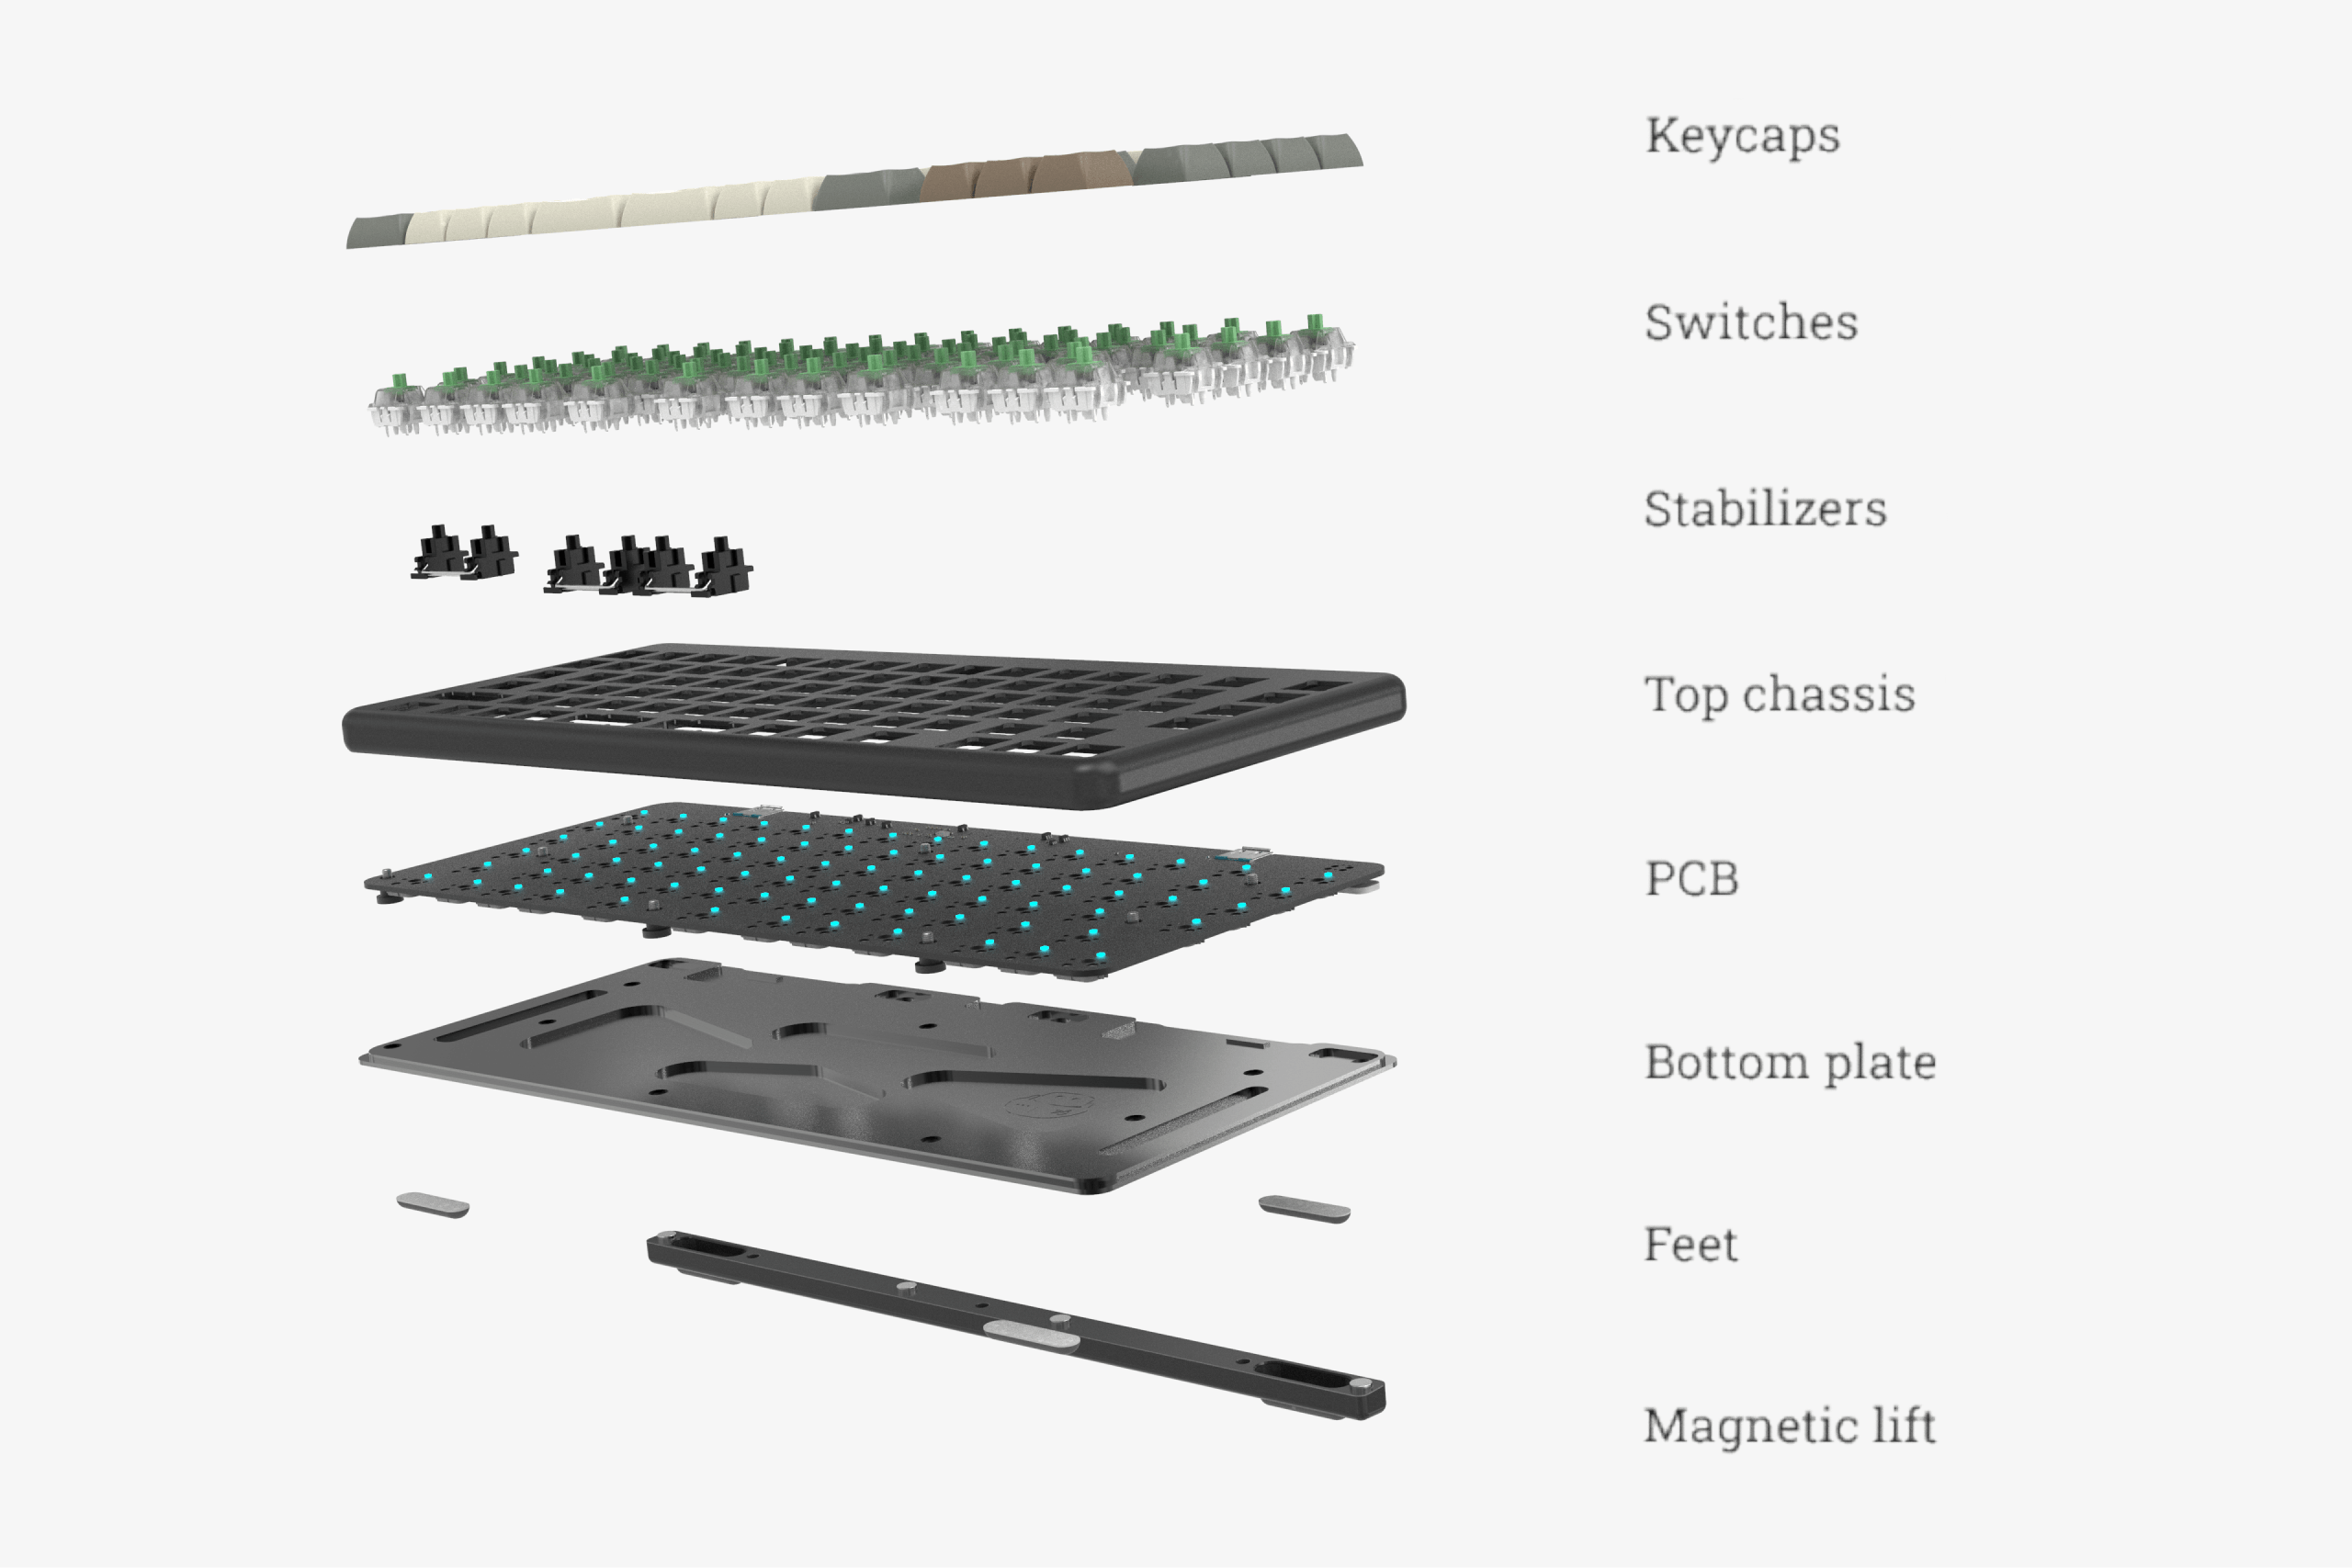 All parts of the keyboard are displayed: PCB, top chassis, bottom plate, stabilizers, switches, keycaps, feet, and a magnetic lift.